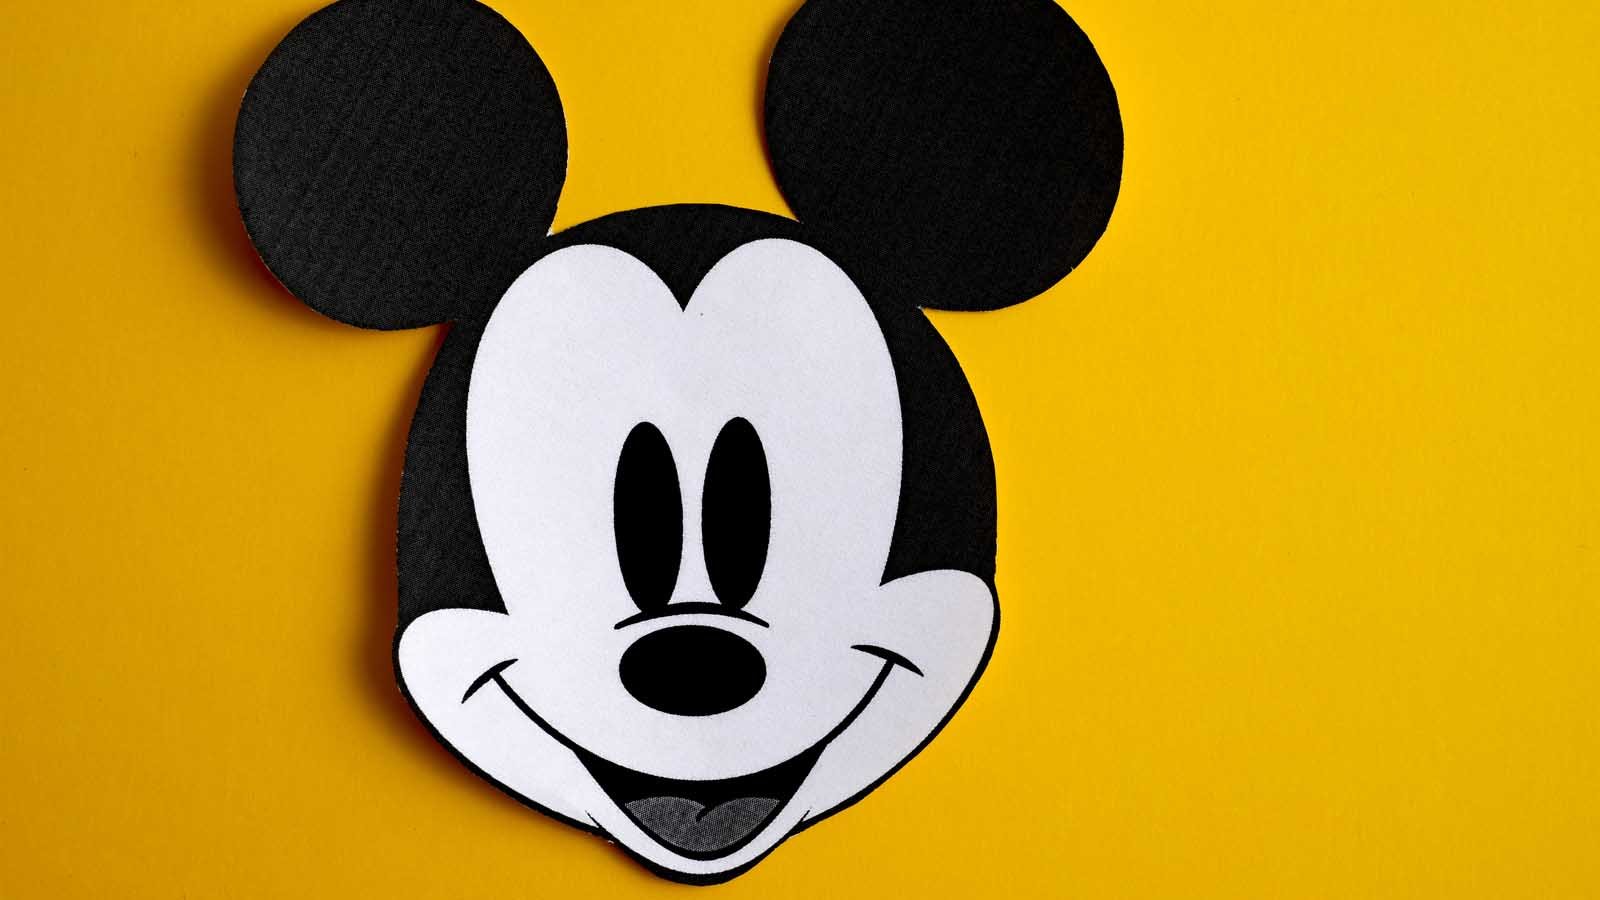 an image of mickey mouse on a yellow background to represent disney (DIS)